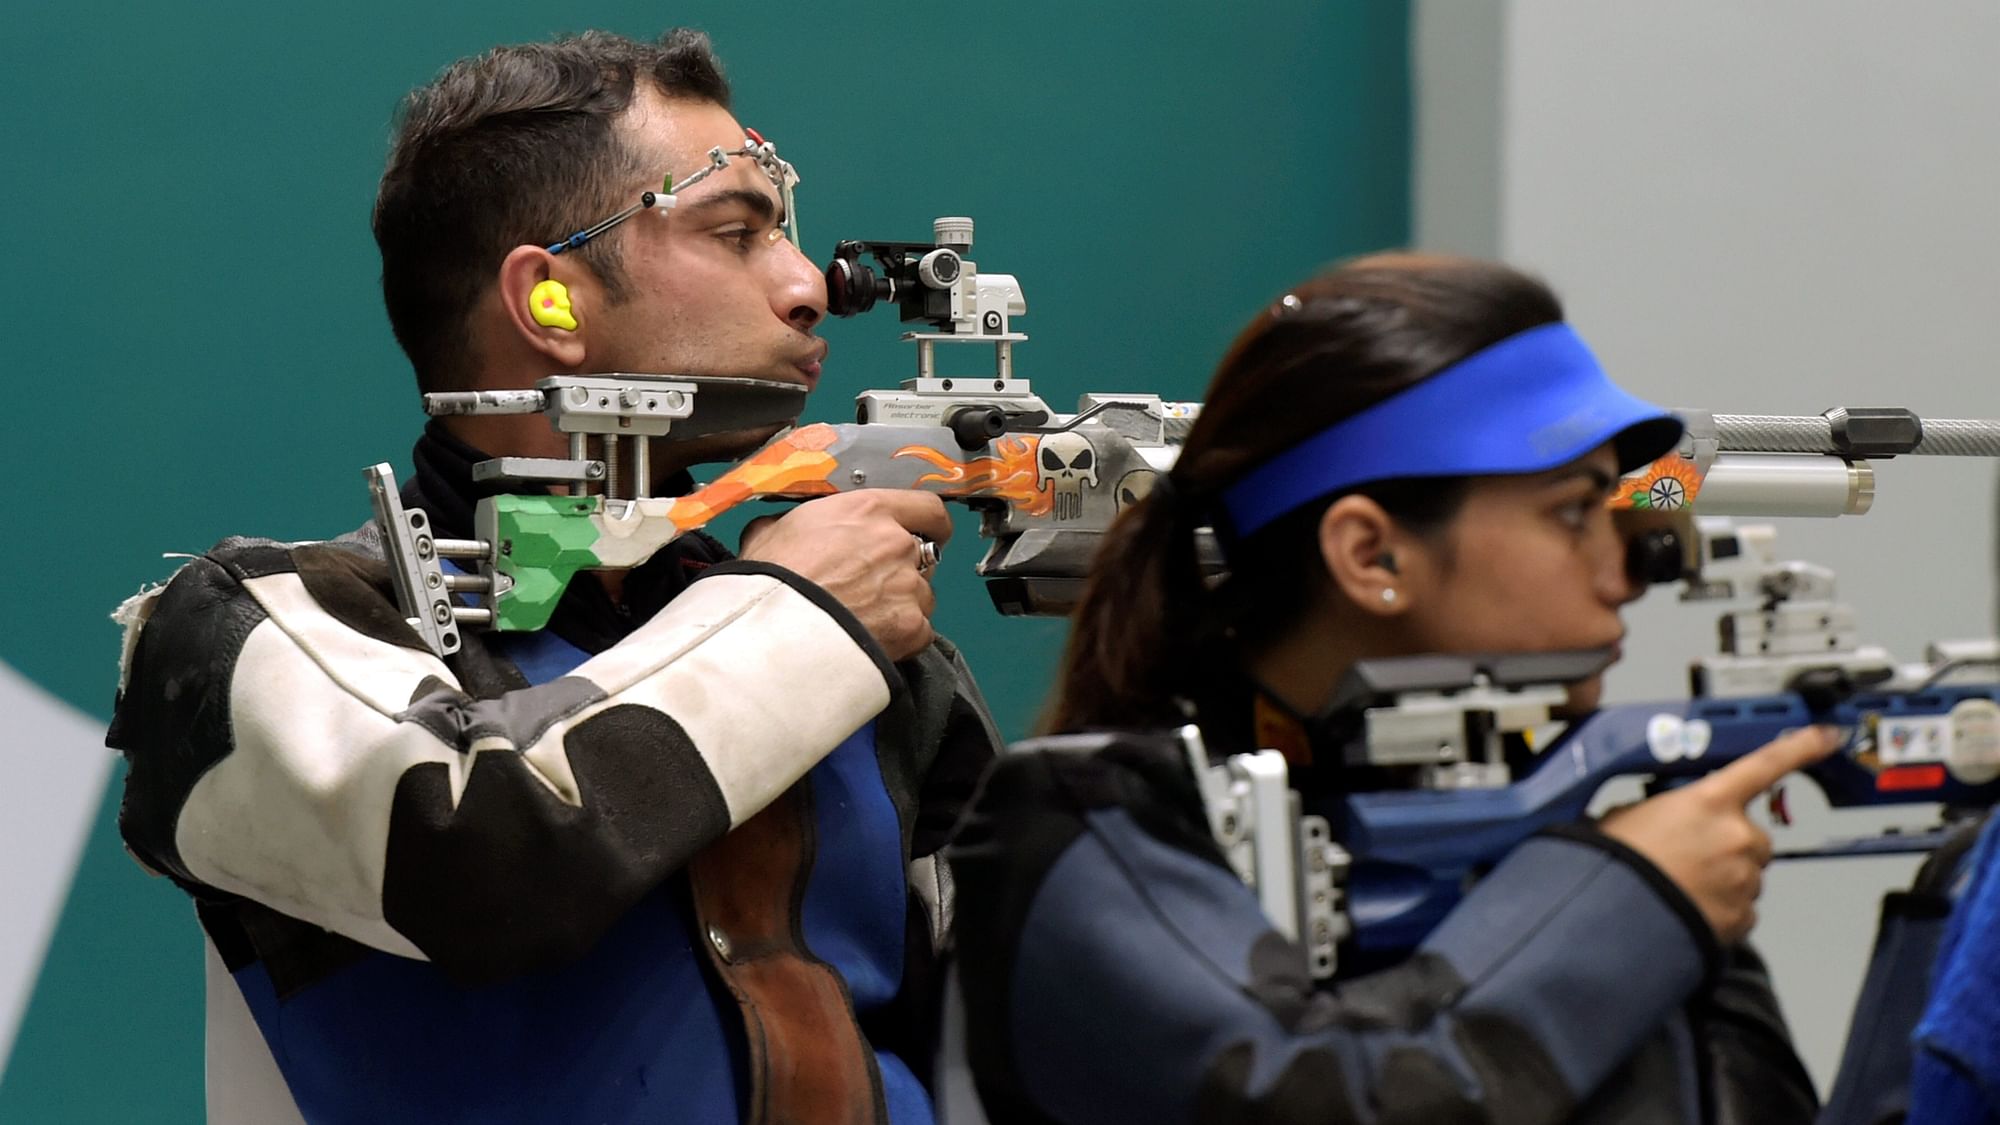 Apurvi Chandela and Ravi Kumar won India’s first medal at this year’s quadrennial event. 